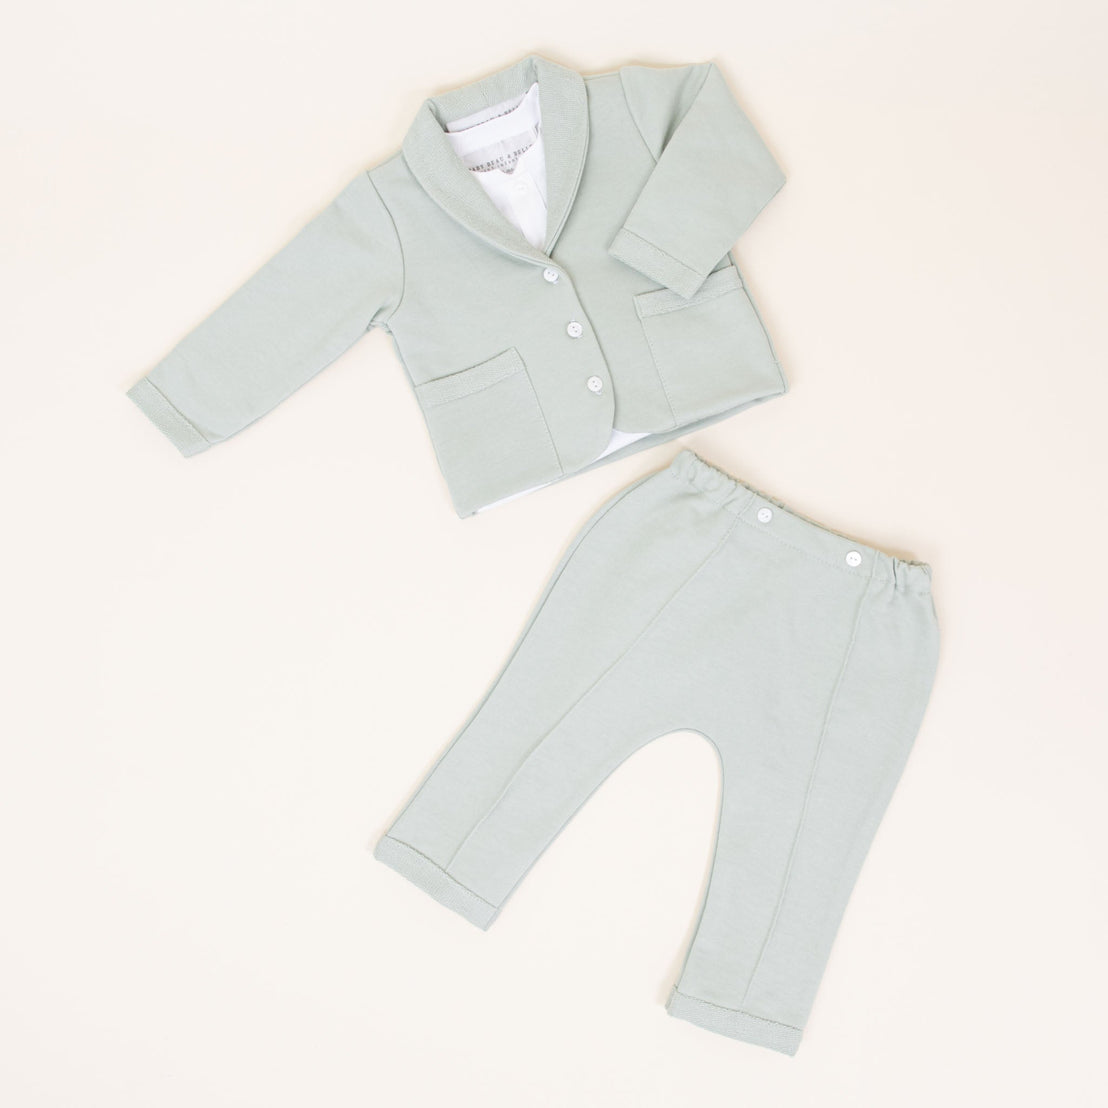 Flat lay of sage green cotton suit